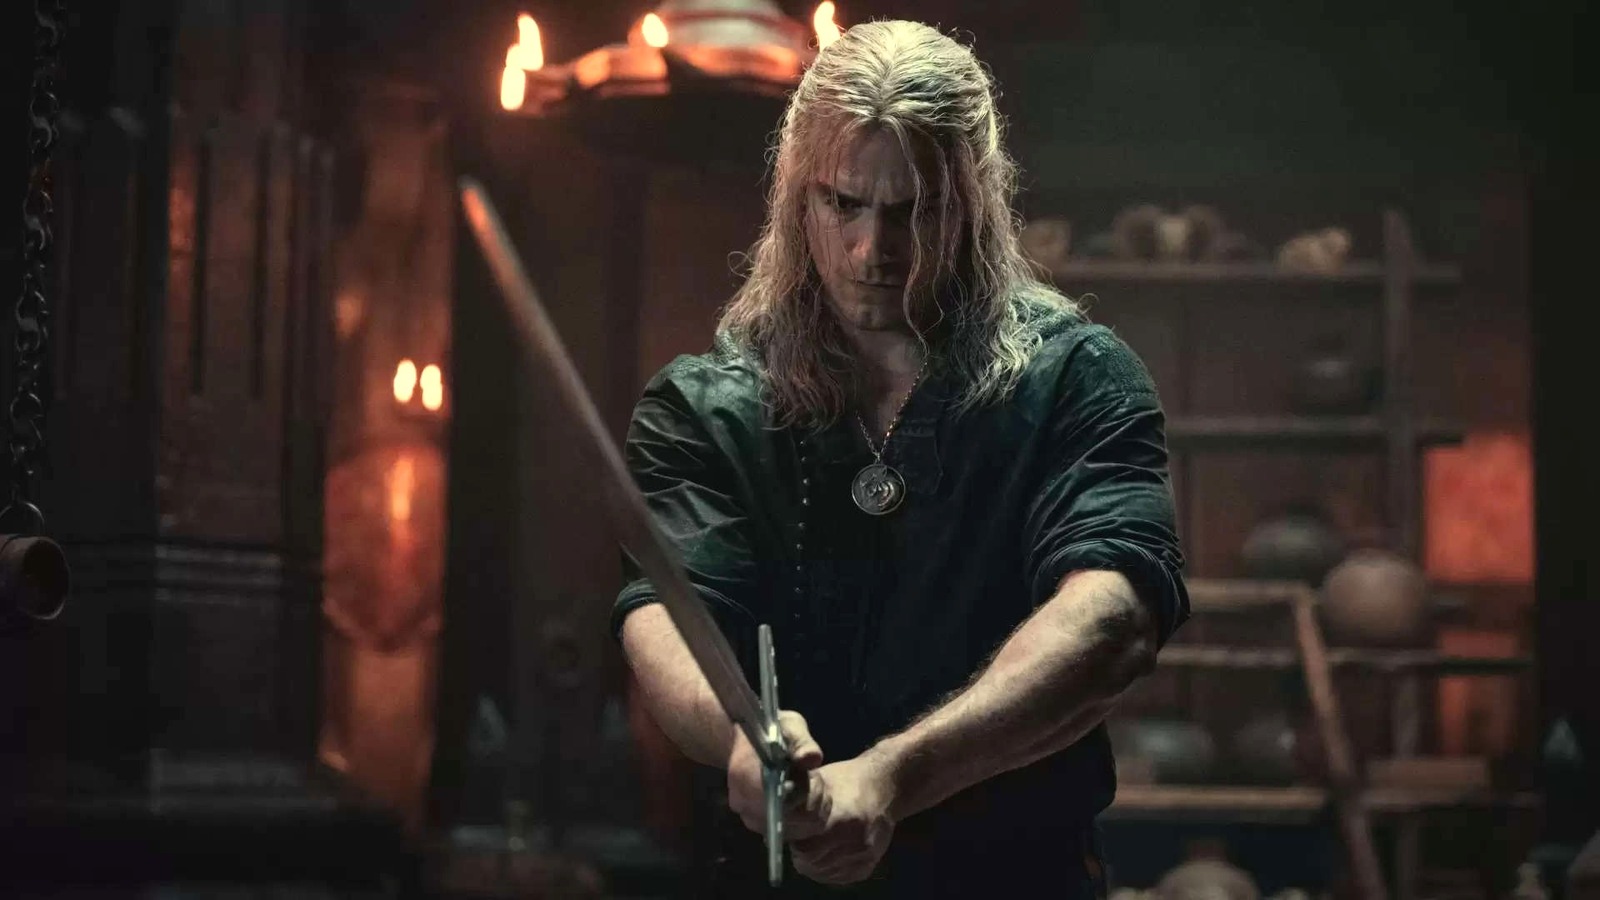 The Witcher' Season 3 has one of the most nightmare fuel monsters yet